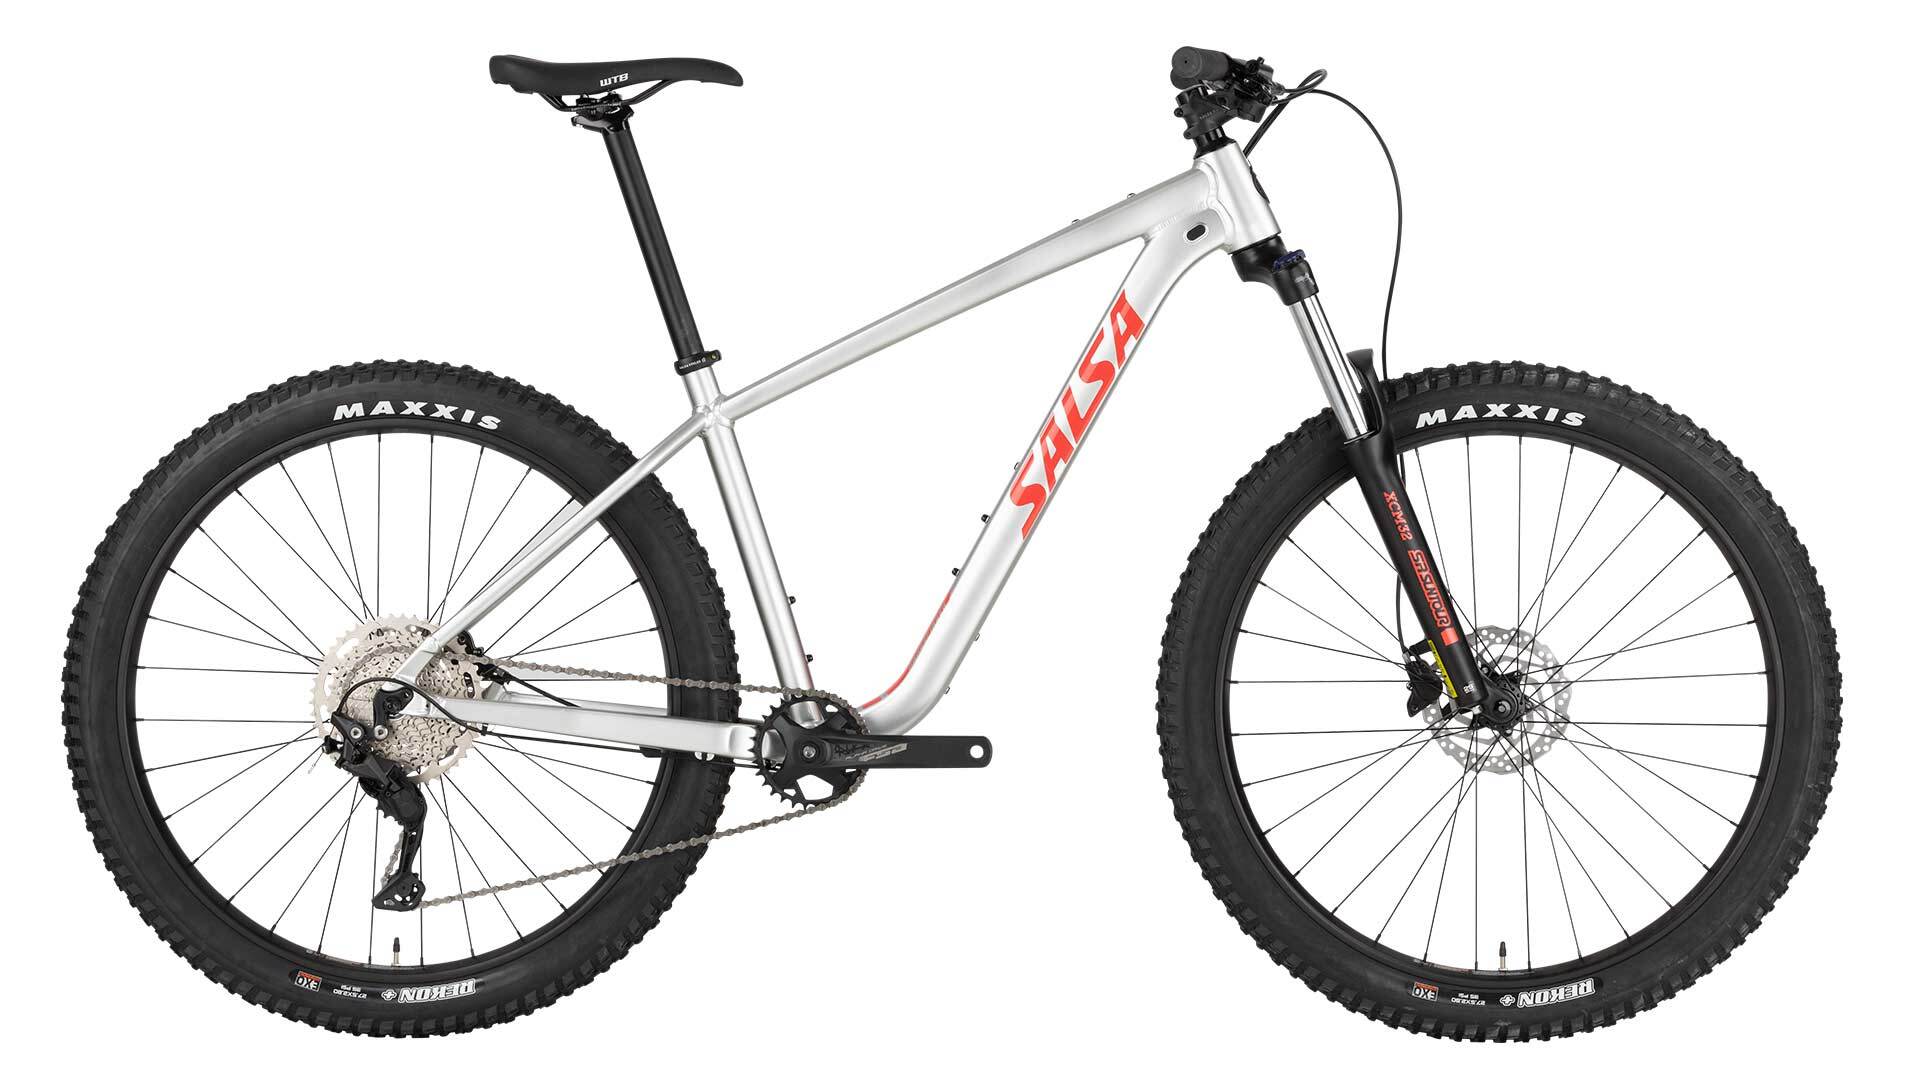 Salsa Ranefinder Advent X with 27.5+ tires